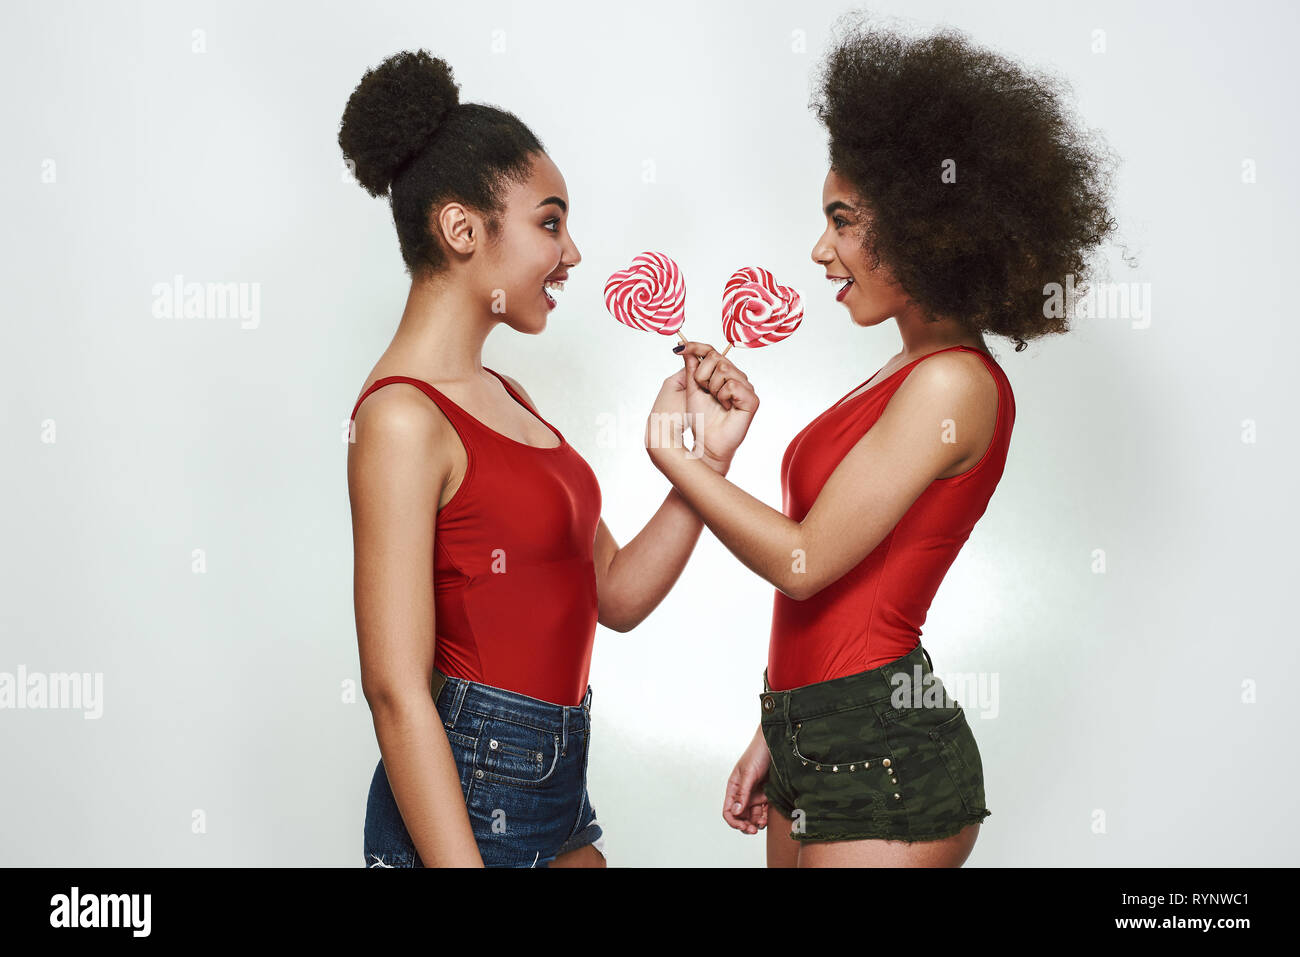 Try my lollipop! Two cheerful young afro american woman in summer clothes are holding lollipops and looking at each other while standing against grey background. Fun concept. Women beauty Stock Photo